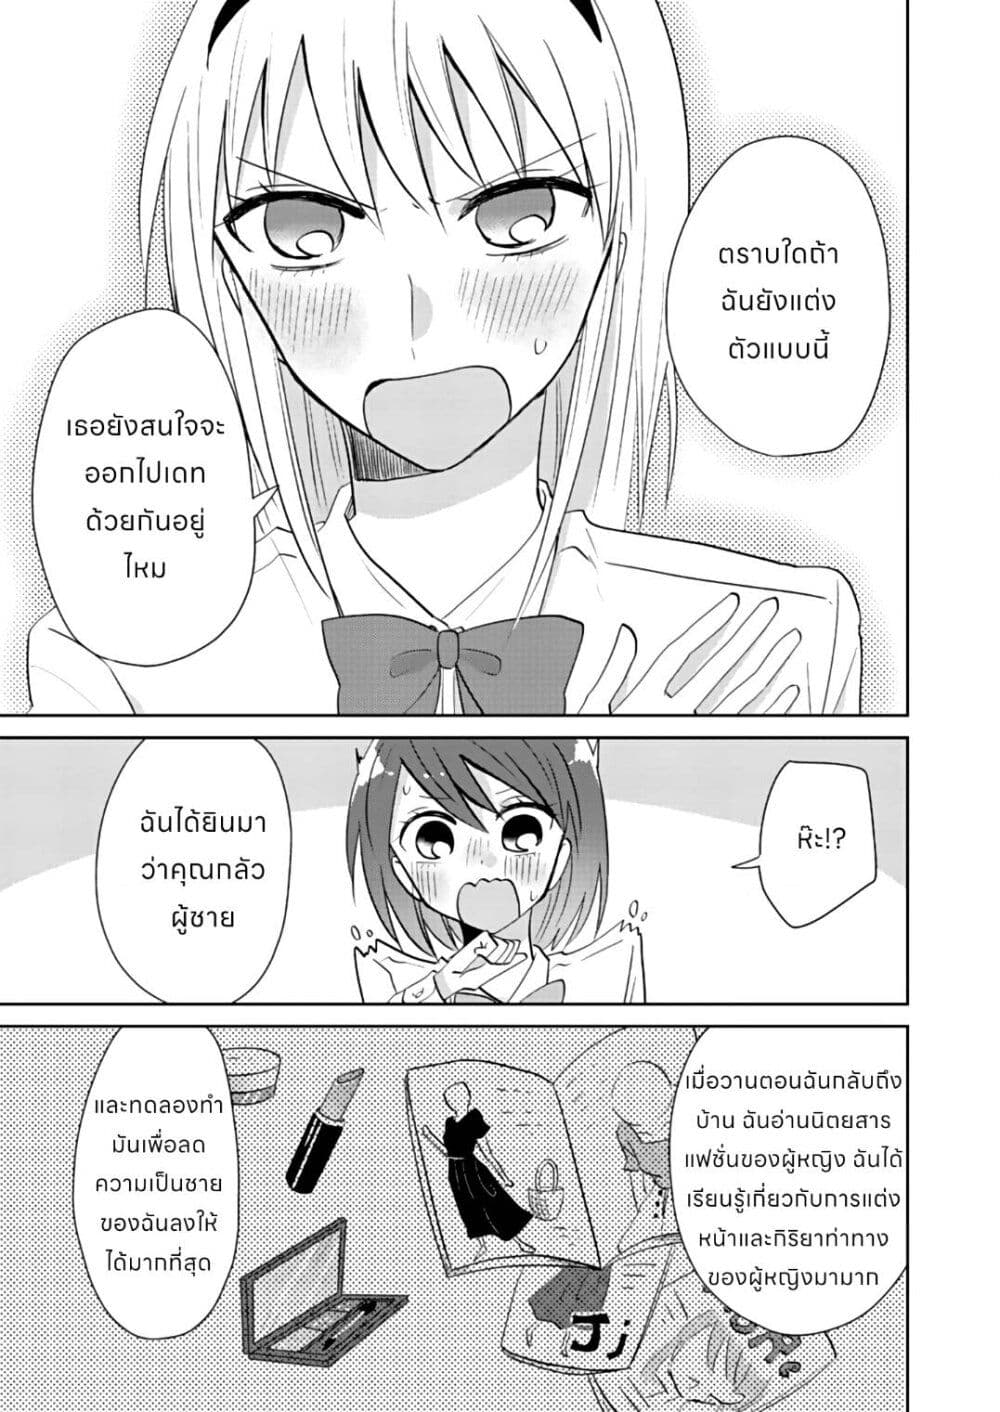 How to Start a Relationship With Crossdressing ตอนที่ 1.3 (8)